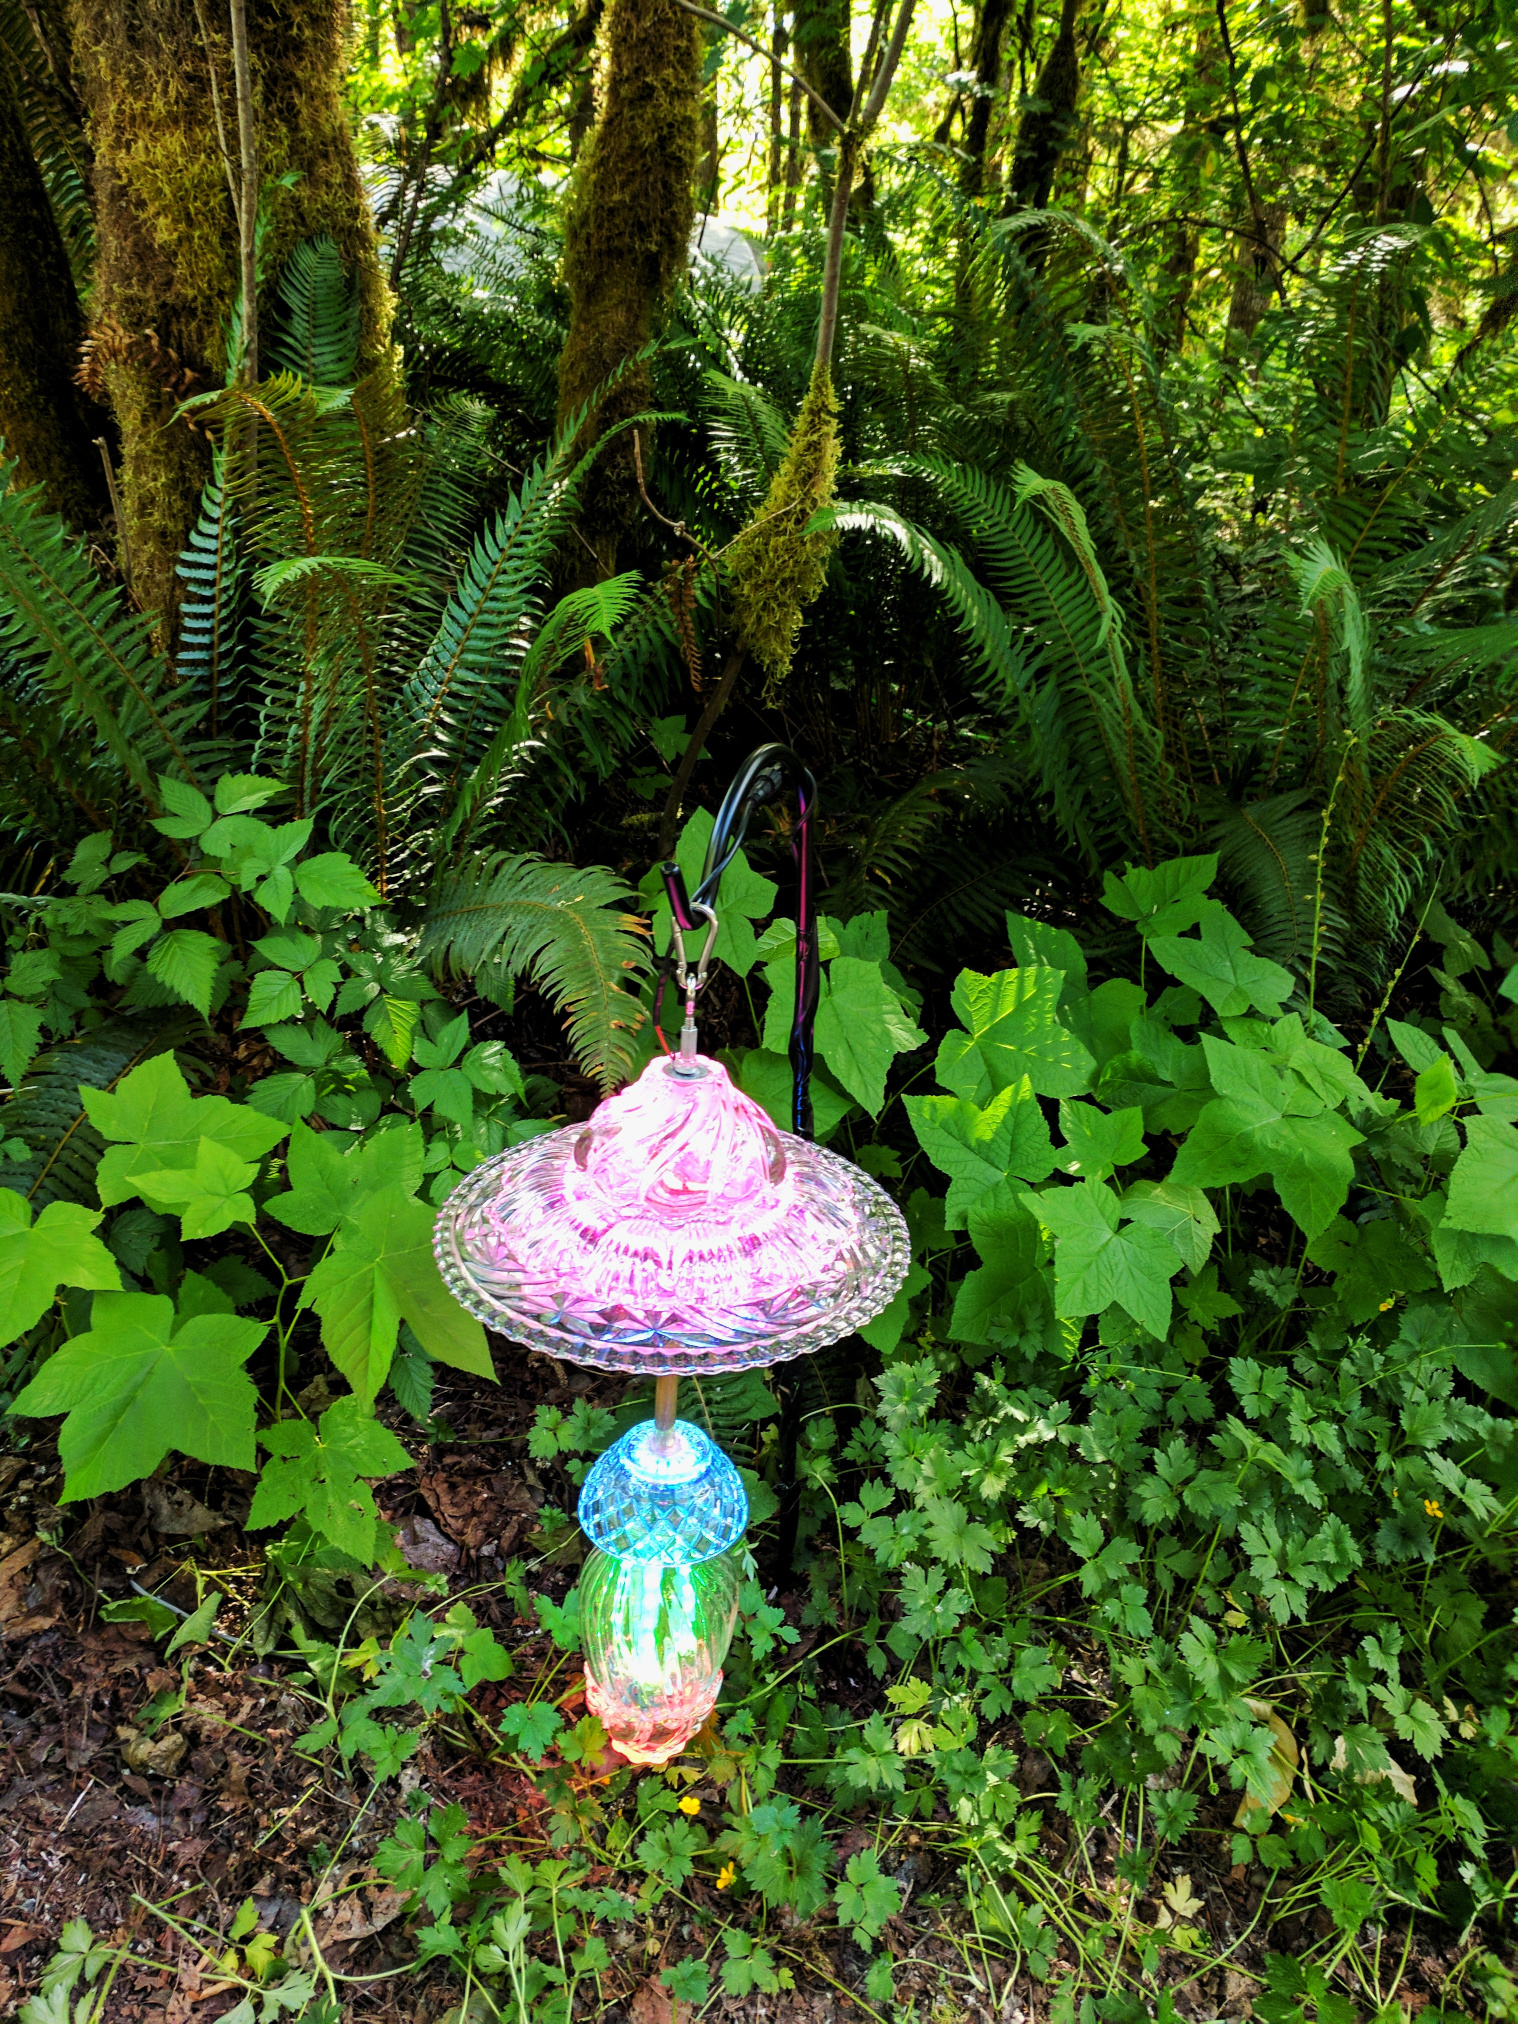 The gently glowing lantern, hanging from a small shepherd's hook in the forest, with ferns, trees, and moss in the background, during the day.